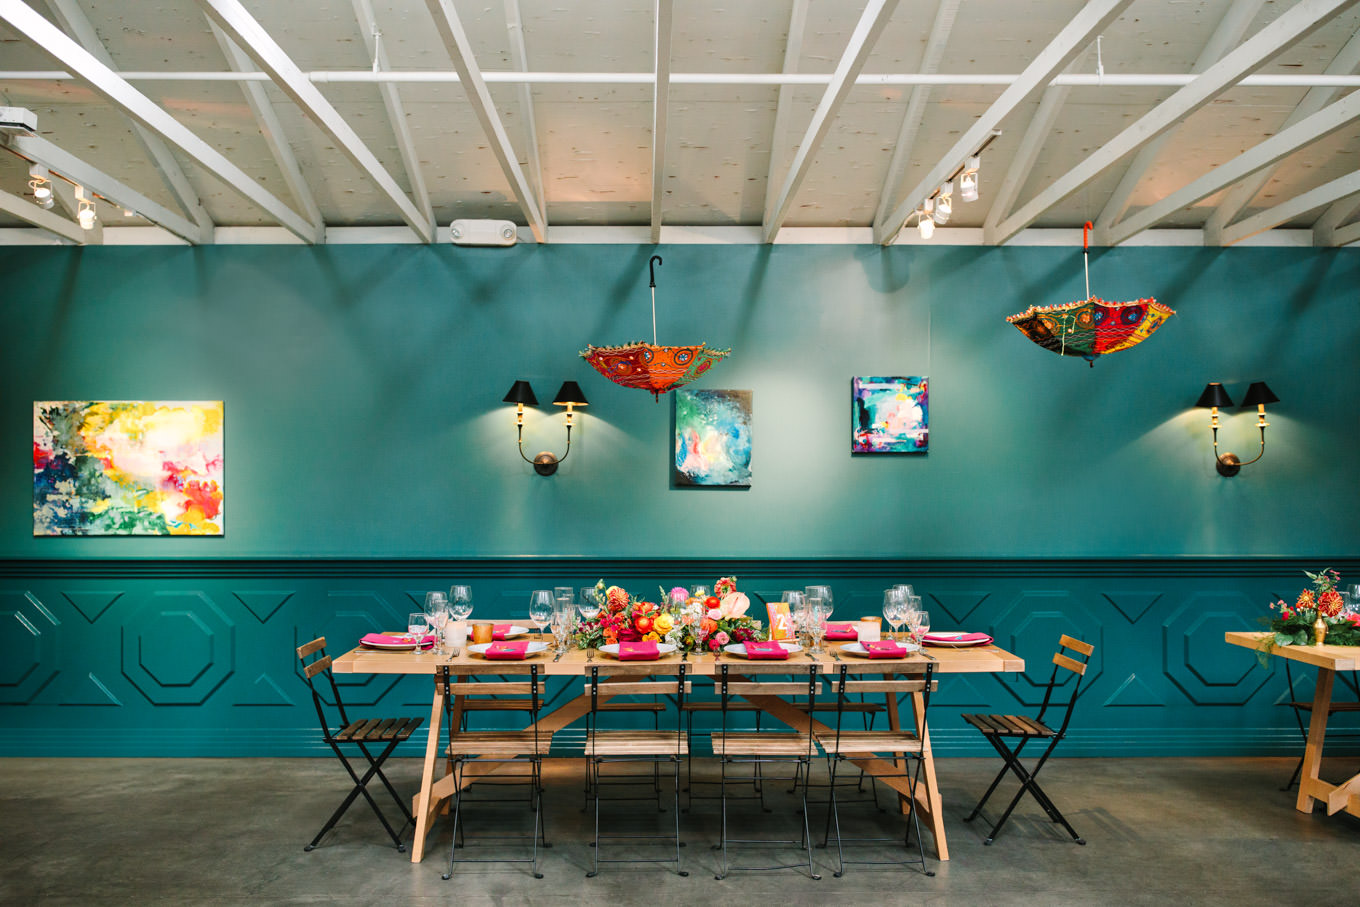 Wedding reception table with upside down umbrellas. Two Disney artists create a unique and colorful Indian Fusion wedding at The Fig House Los Angeles, featured on Green Wedding Shoes. | Colorful and elevated wedding inspiration for fun-loving couples in Southern California | #indianwedding #indianfusionwedding #thefighouse #losangeleswedding   Source: Mary Costa Photography | Los Angeles